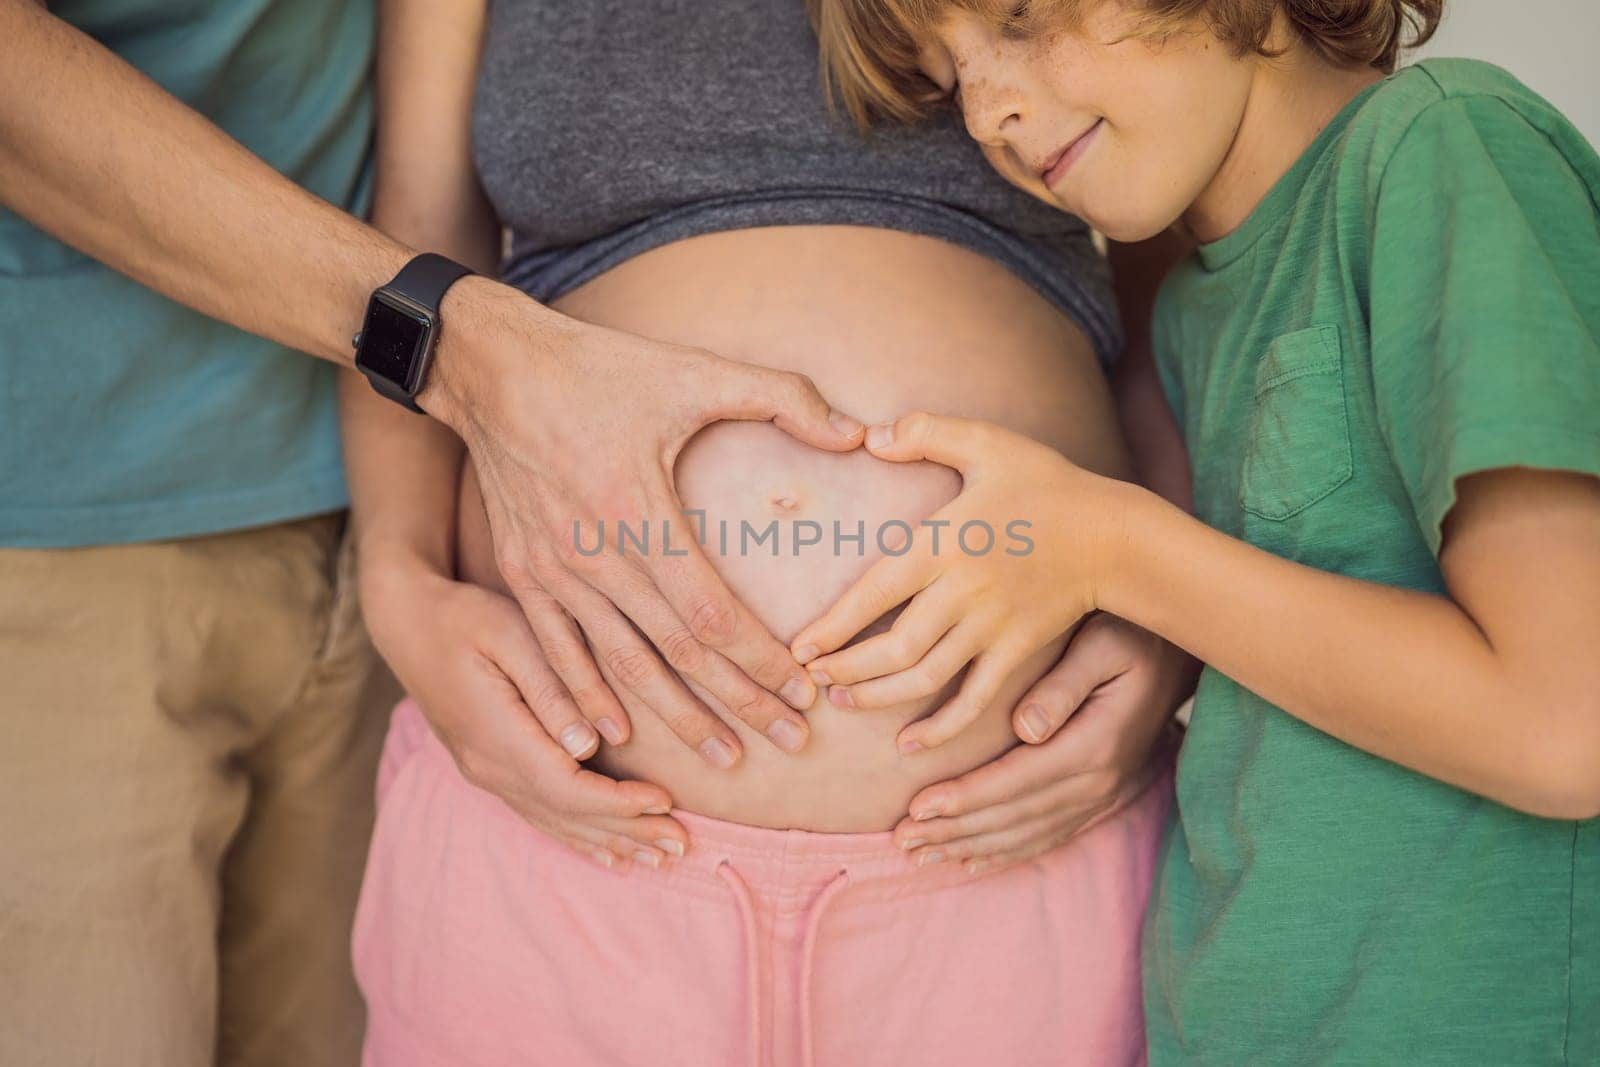 Pregnant Woman, father and first kid child holding hands in a heart shape on her baby bump. Pregnant Belly with fingers Heart symbol.